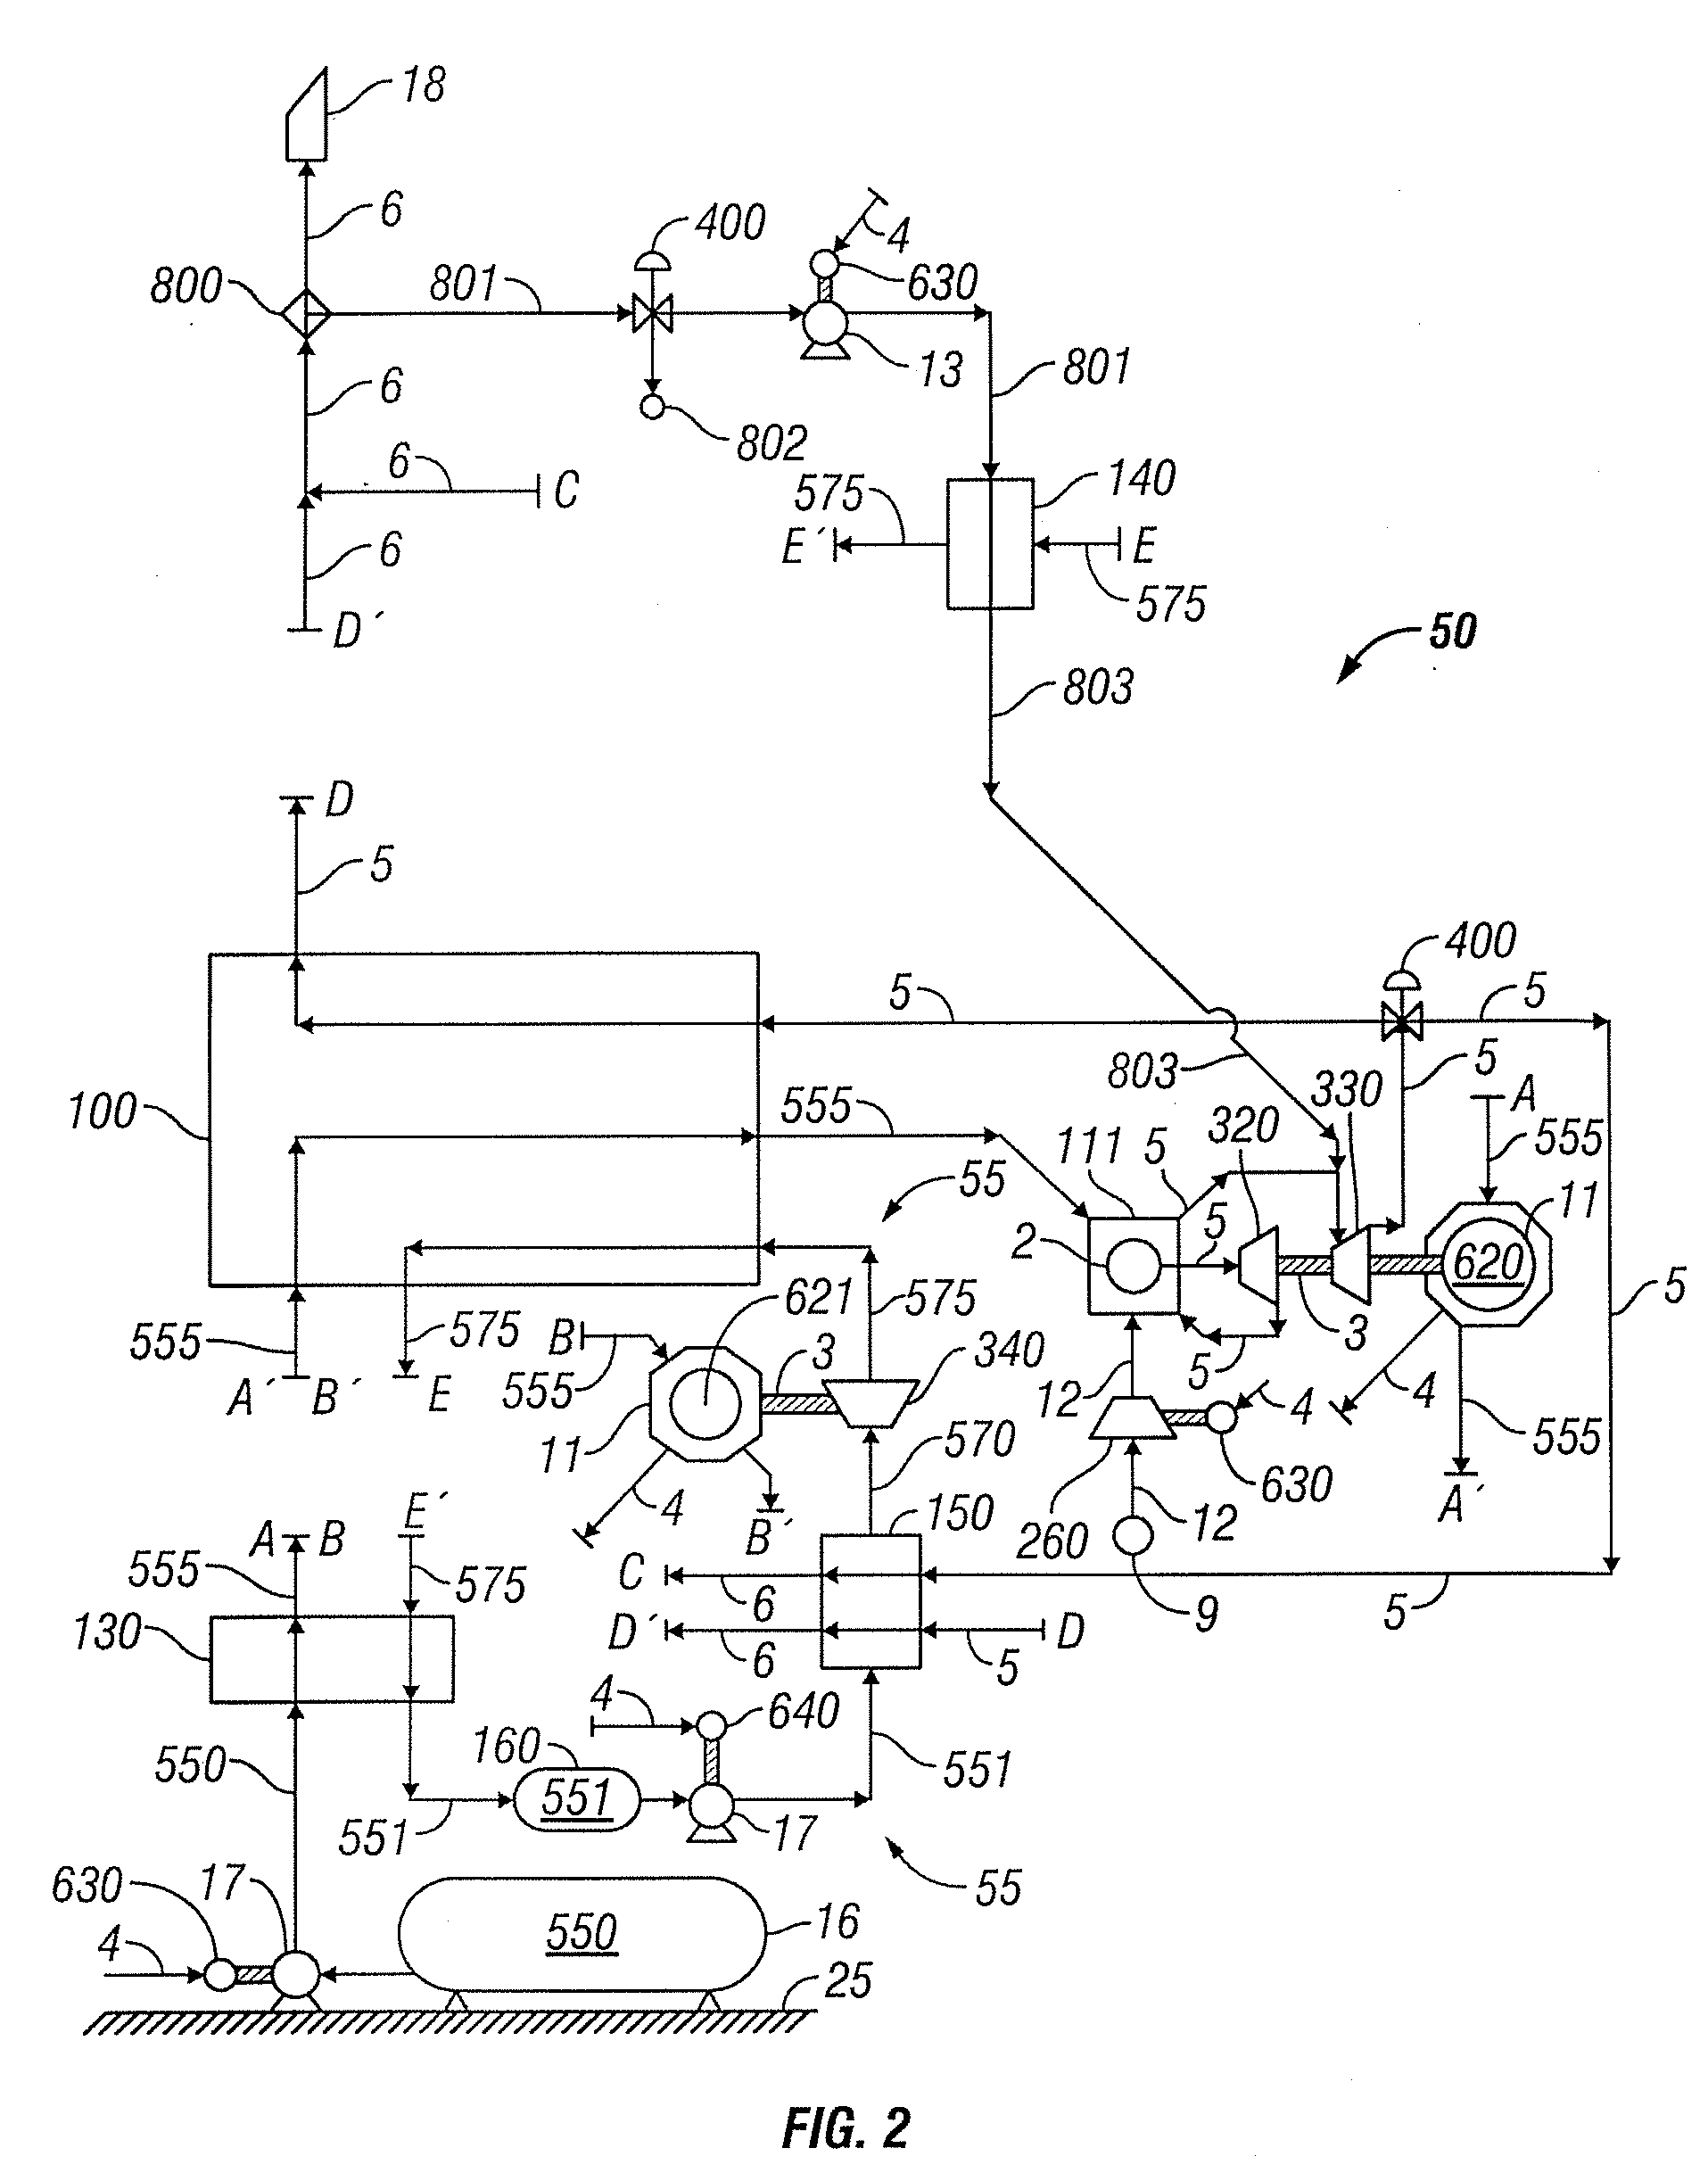 System and method for liquid air production, power storage and power release